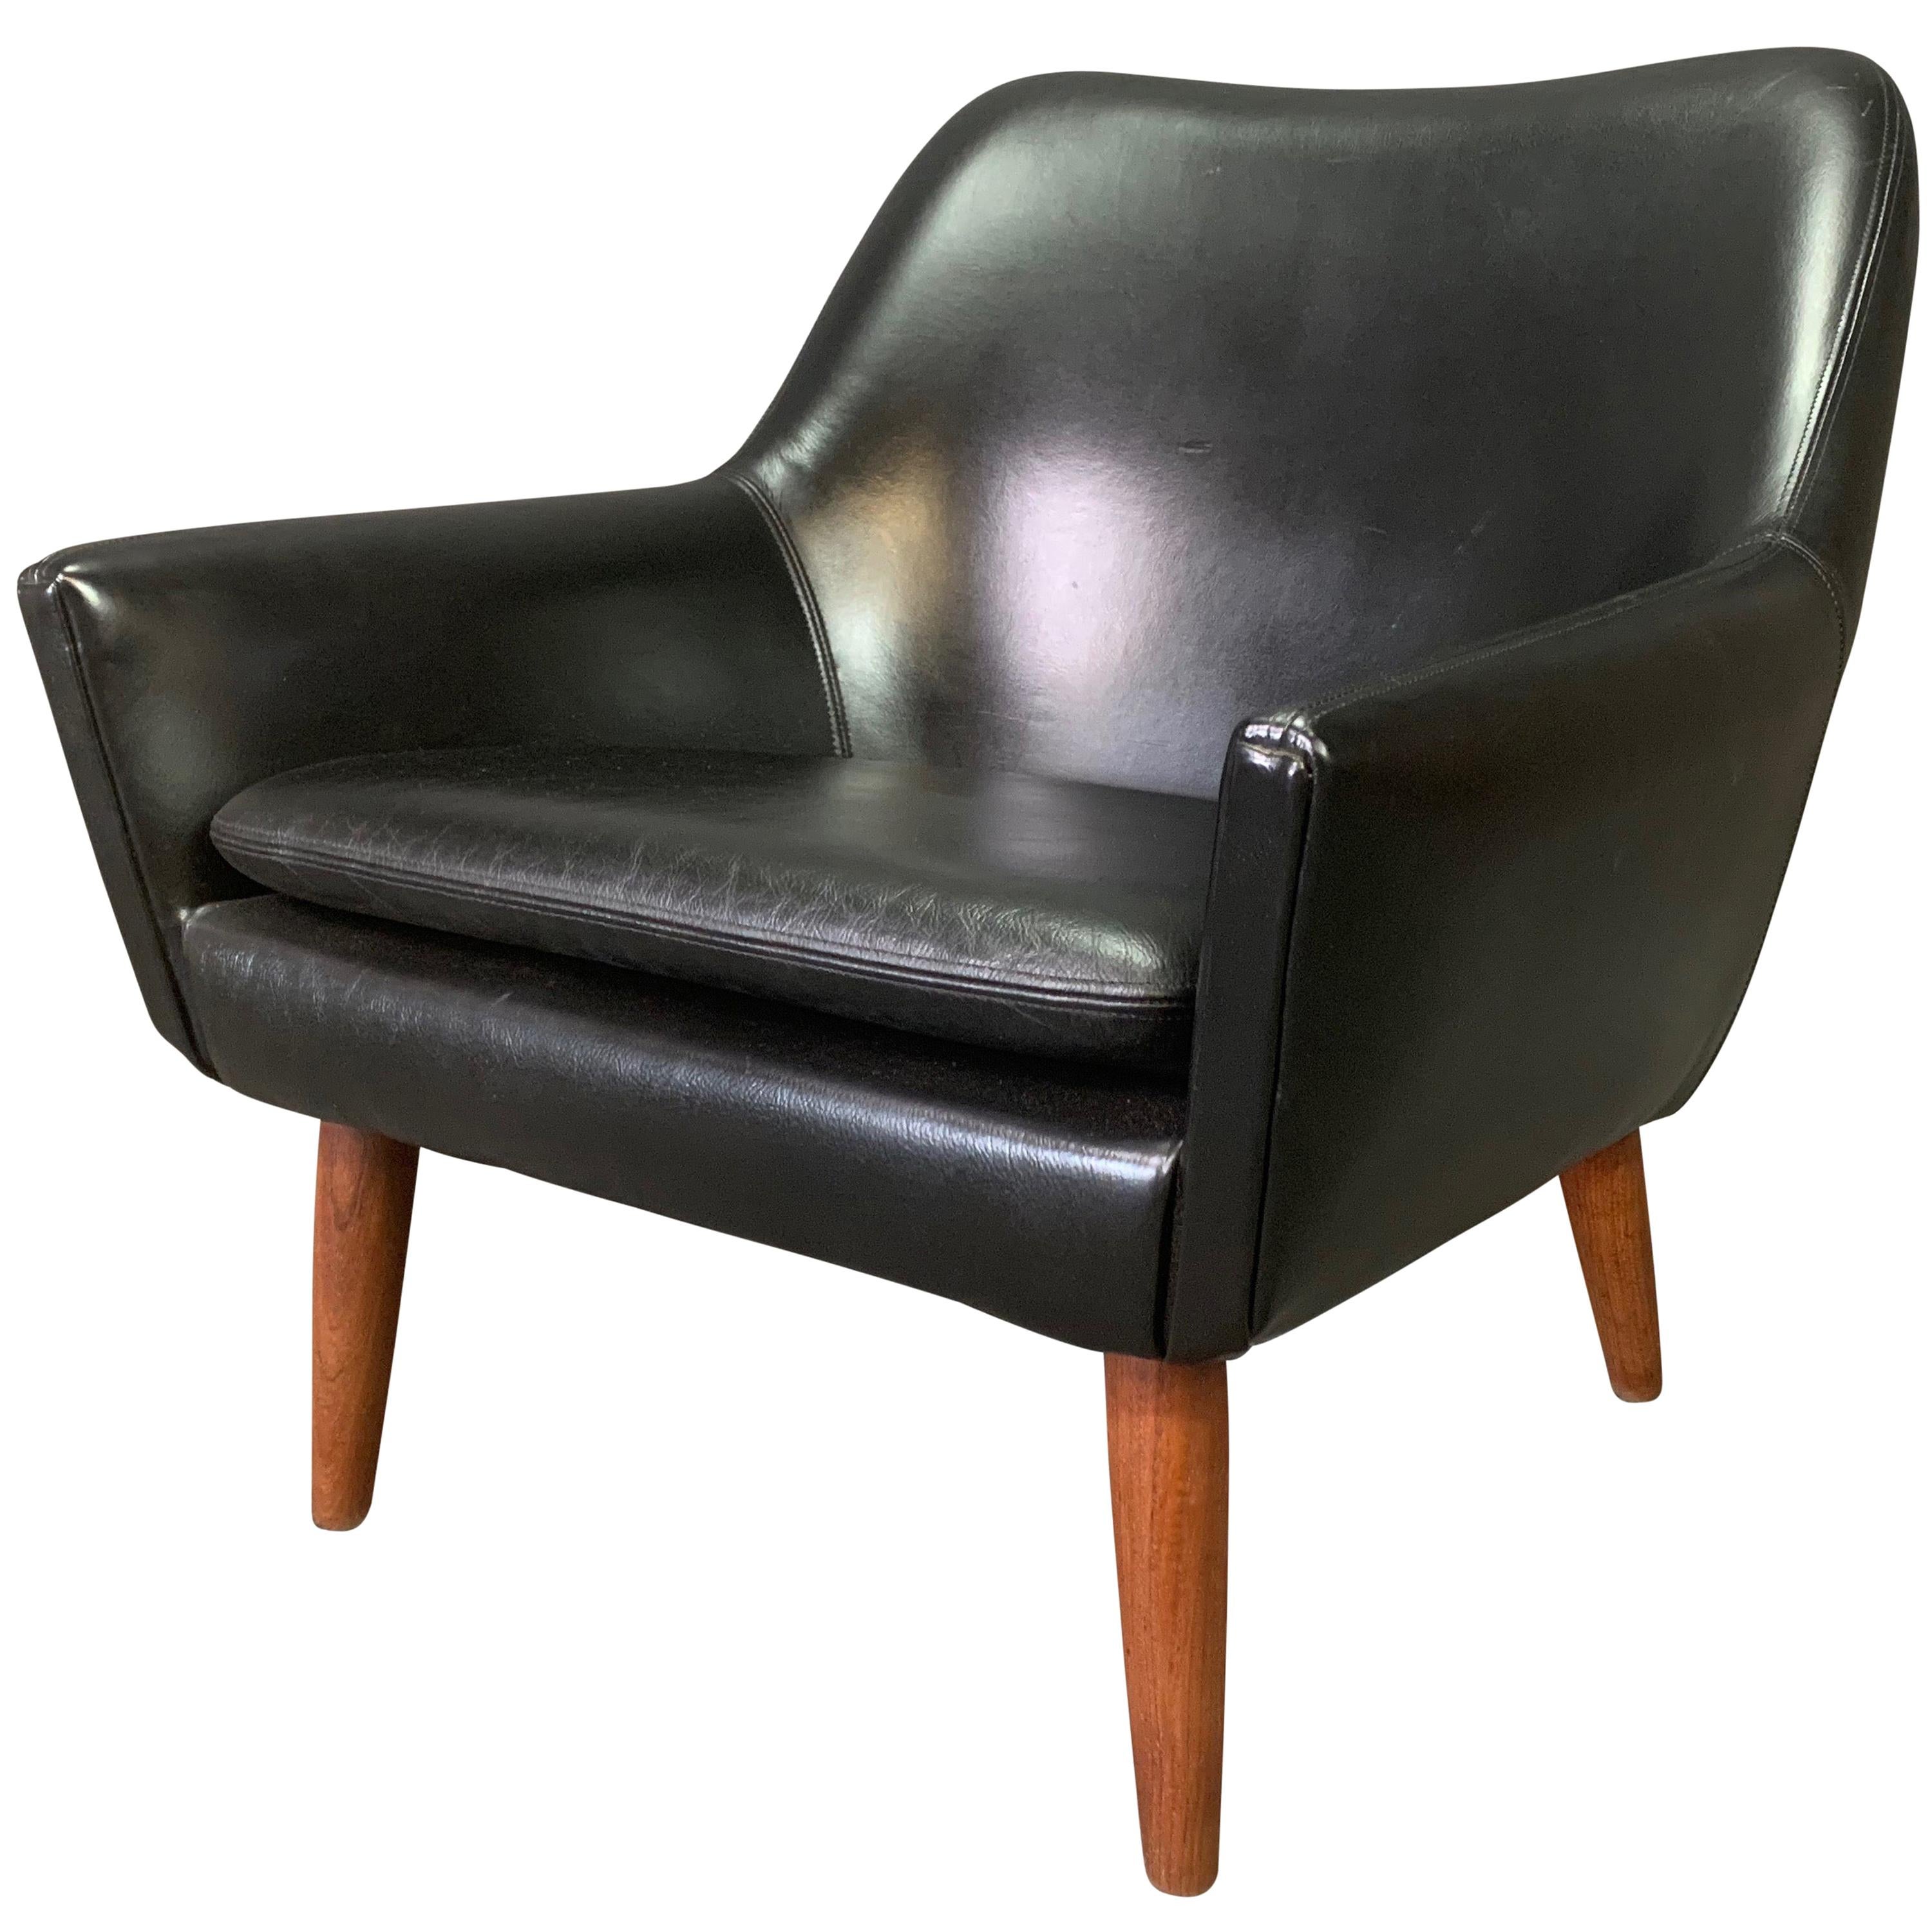 Vintage Danish Mid-Century Modern Leather and Teak Lounge Chair For Sale